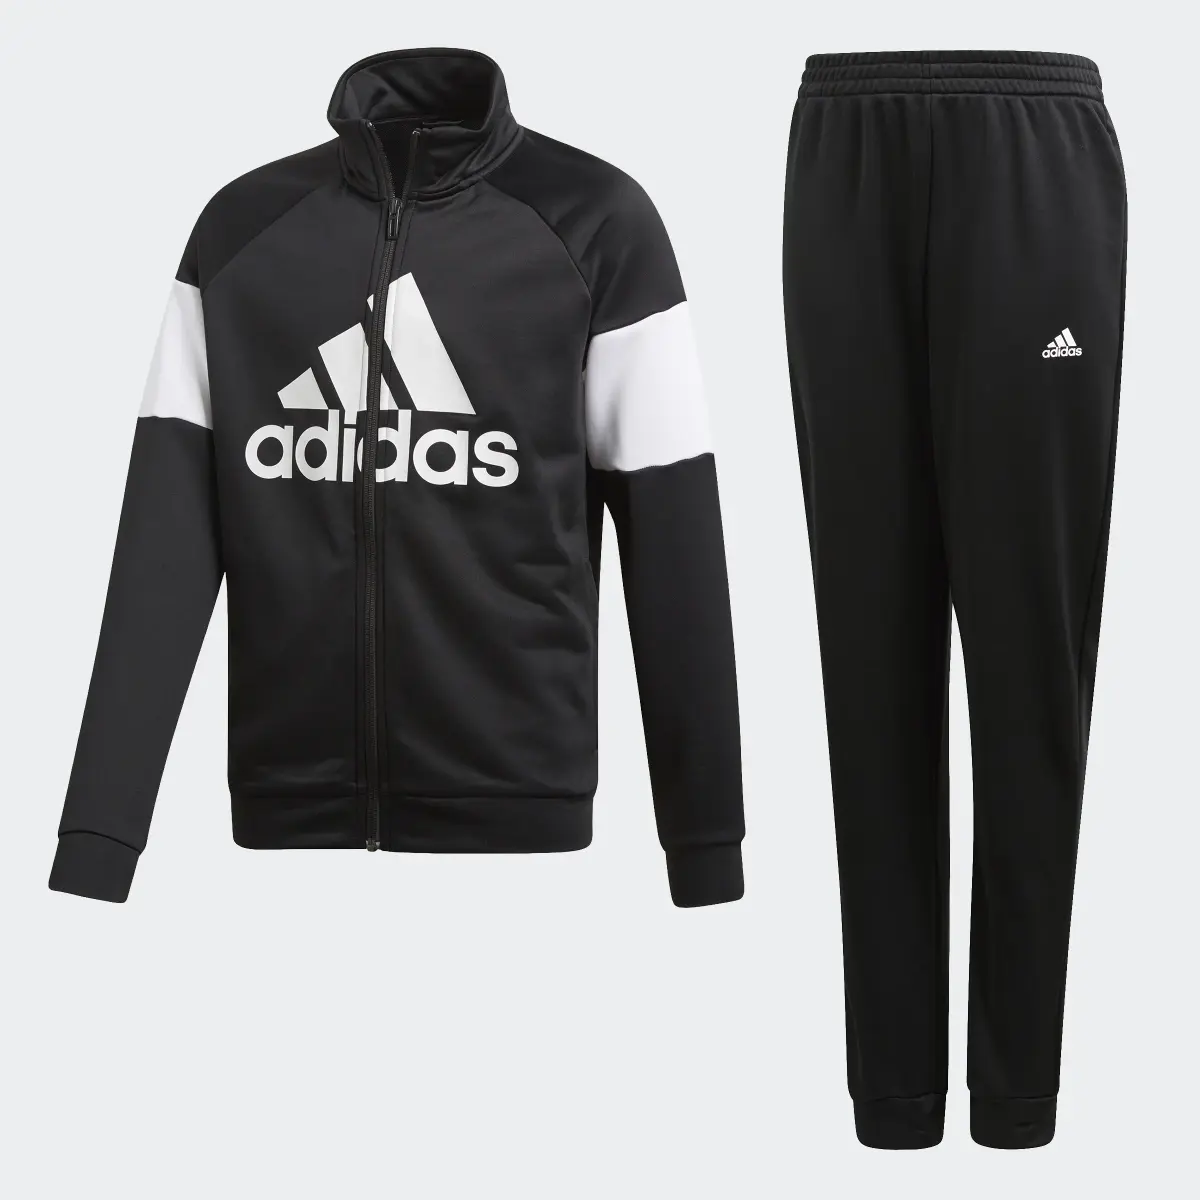 Adidas Badge of Sport Track Suit. 1